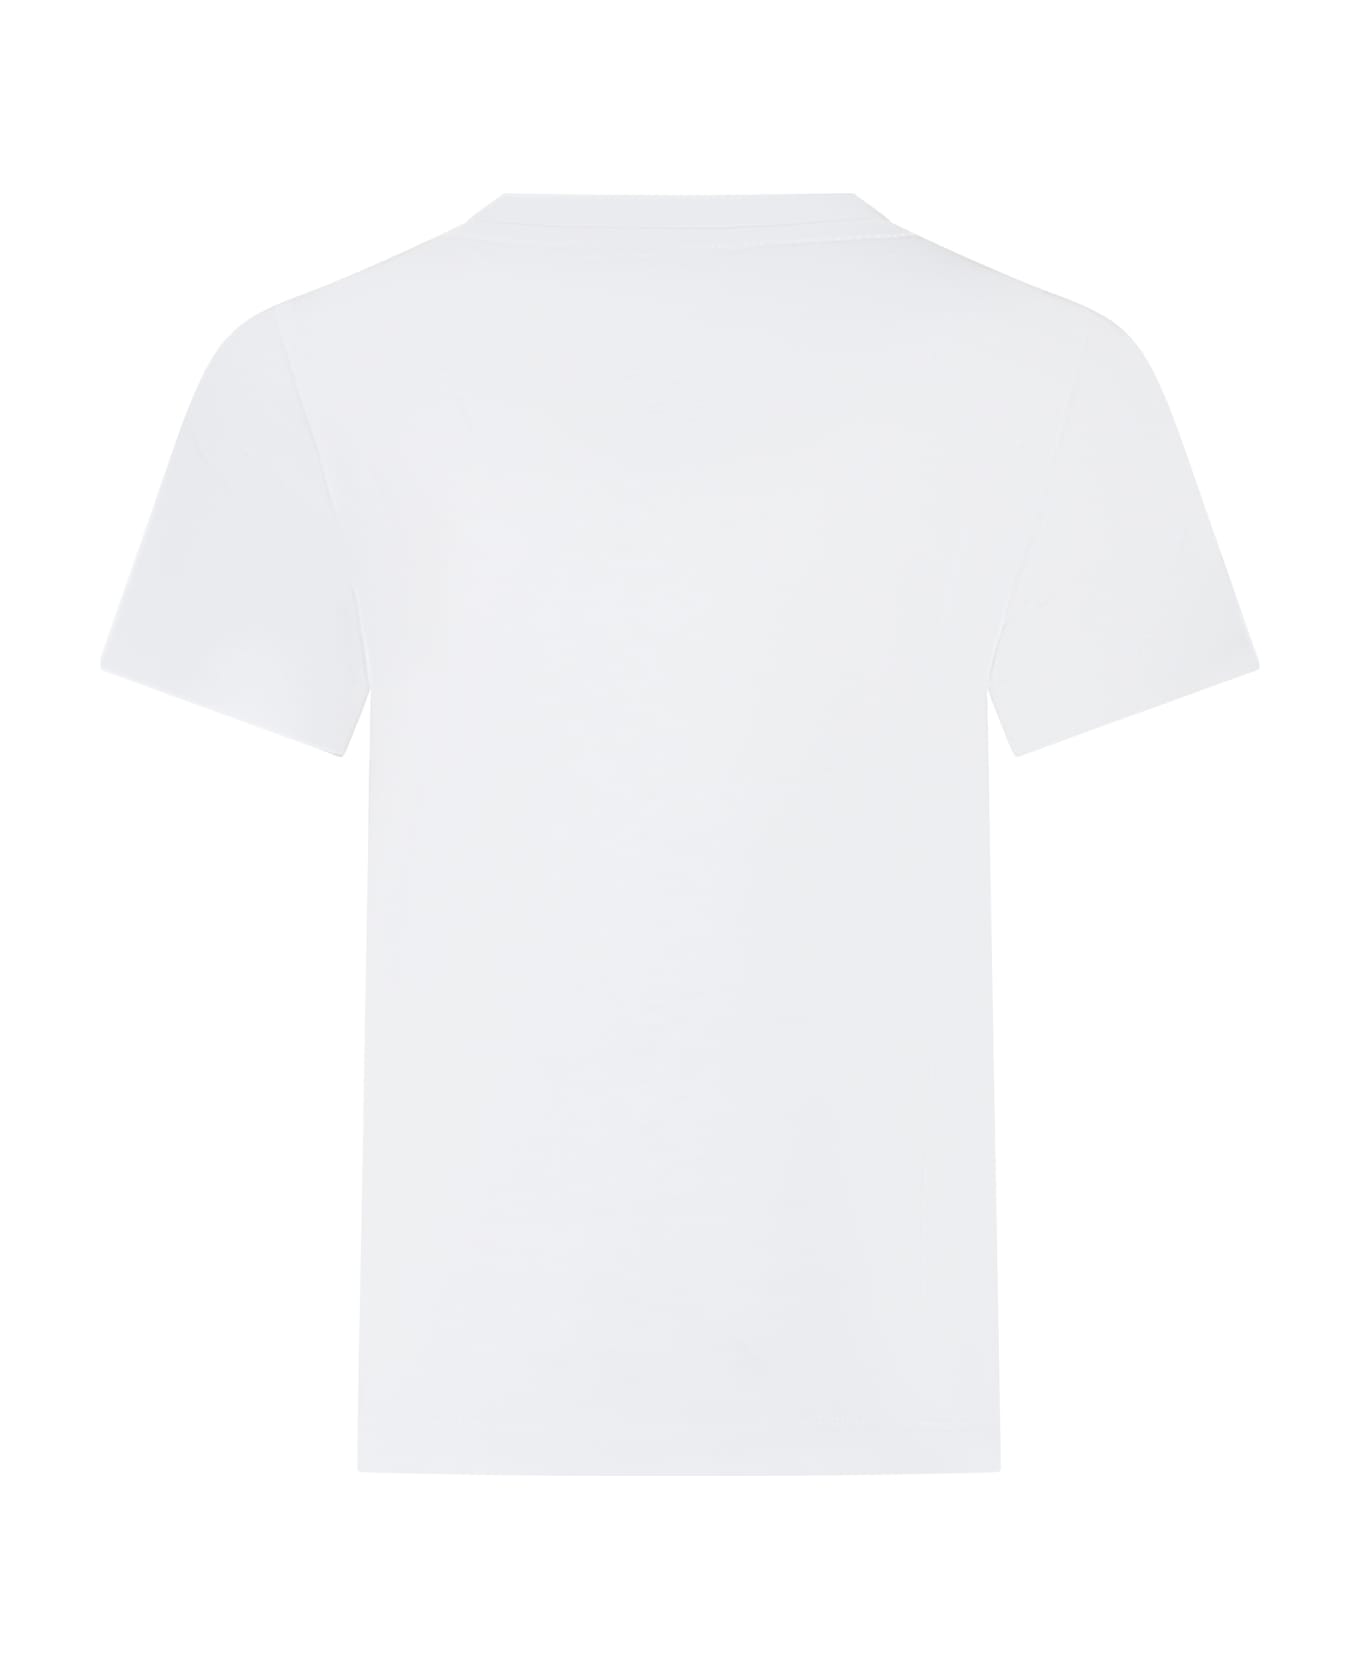 Versace White T-shirt For Boy With Anchor Print - White